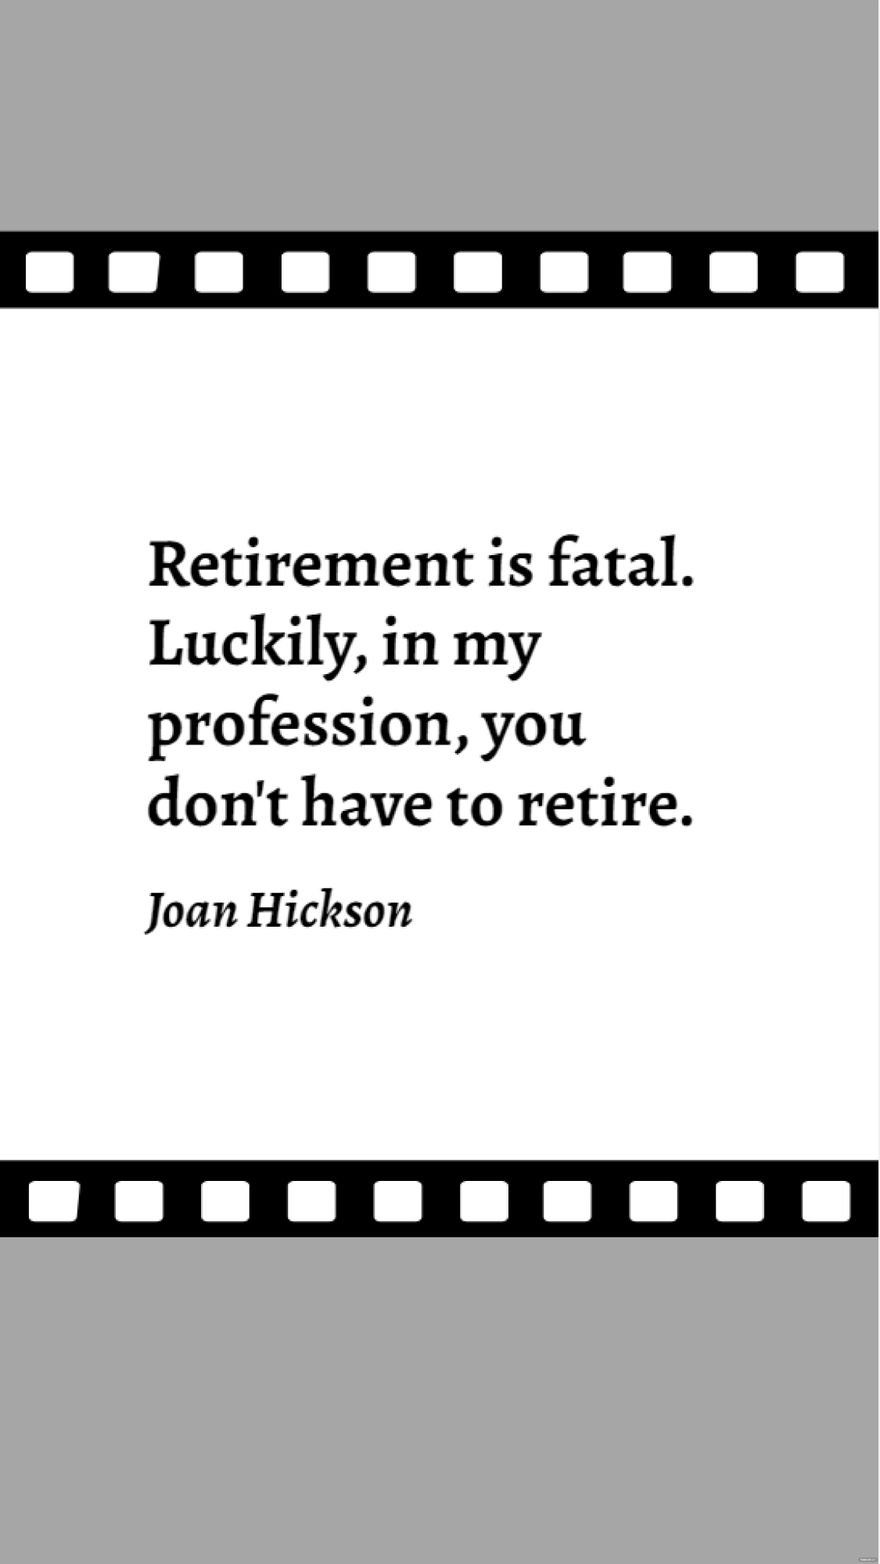 Joan Hickson - Retirement is fatal. Luckily, in my profession, you don't have to retire.